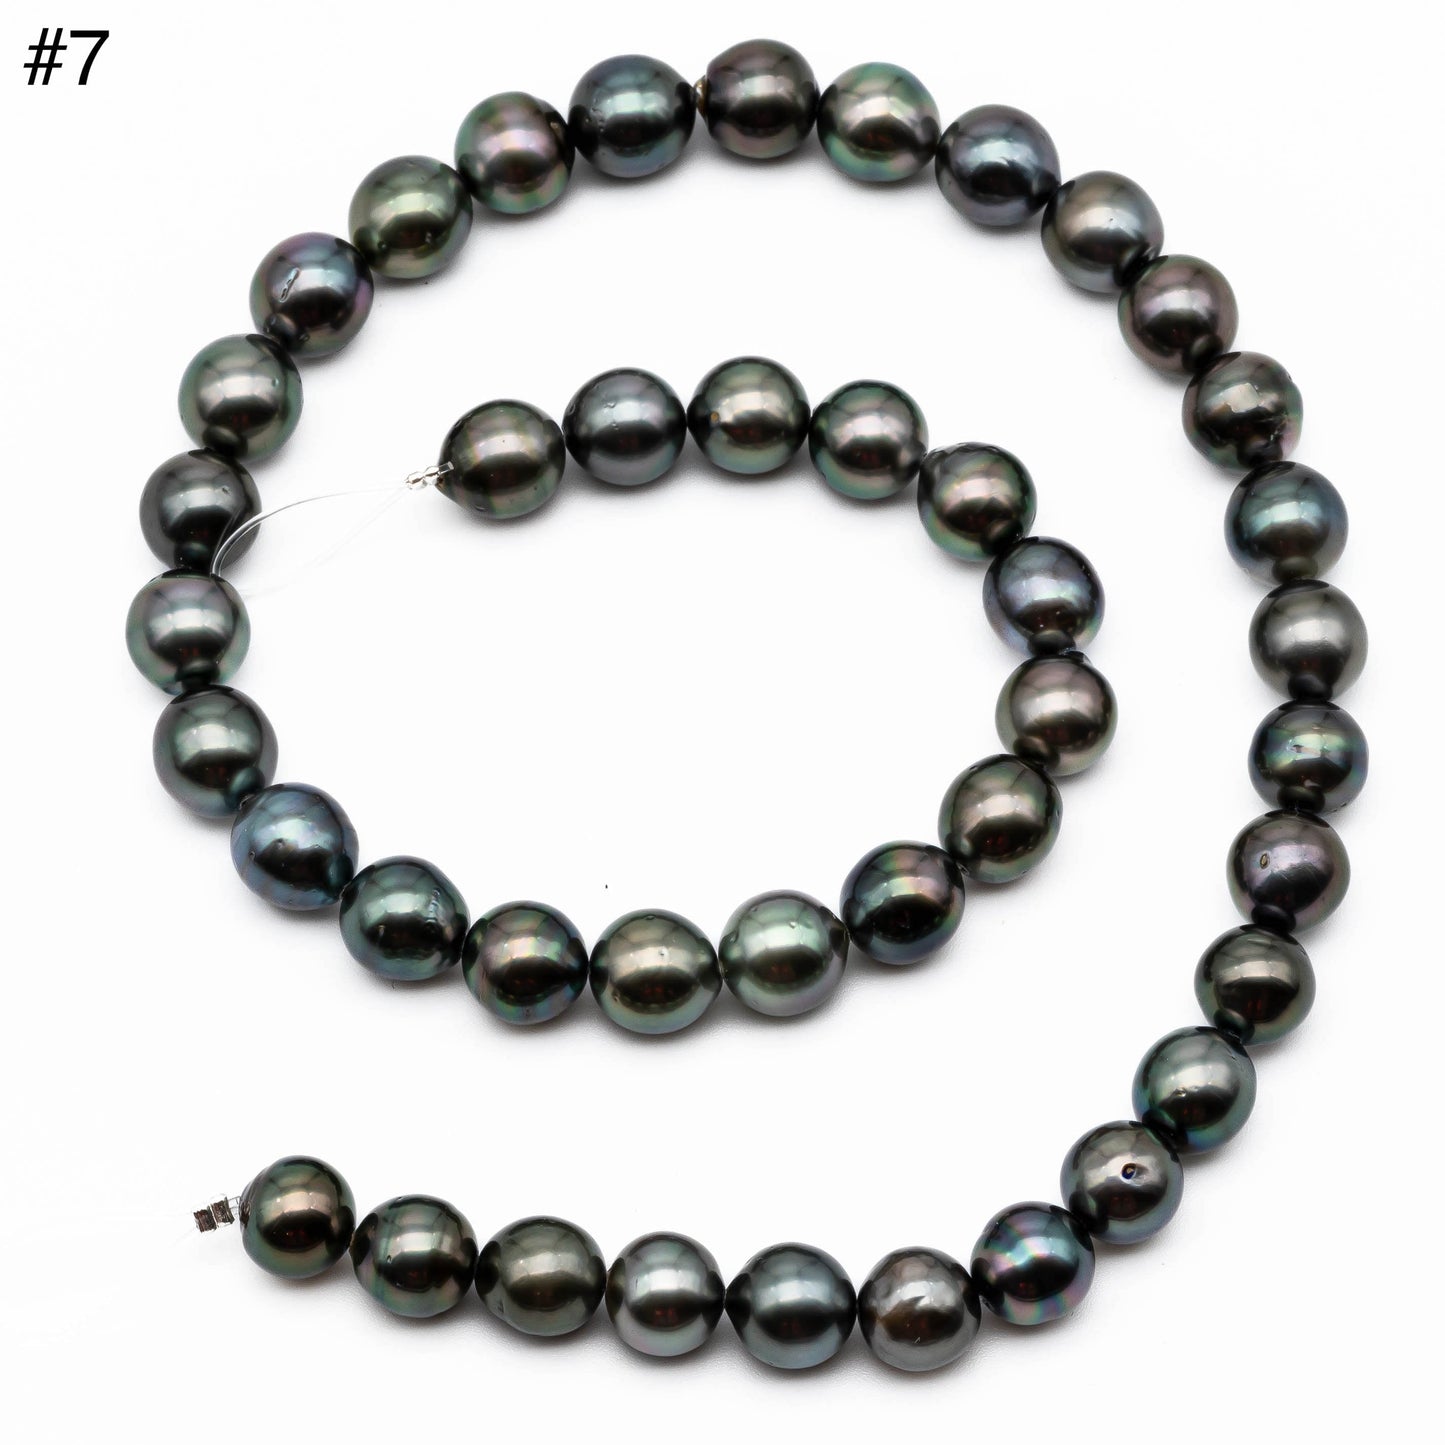 Tahitian Pearl Strand, Near Round or Drop Shape Natural Pearl Strand with High Luster, For Jewelry Making, 9-9.5mm, SKU # 1044TH